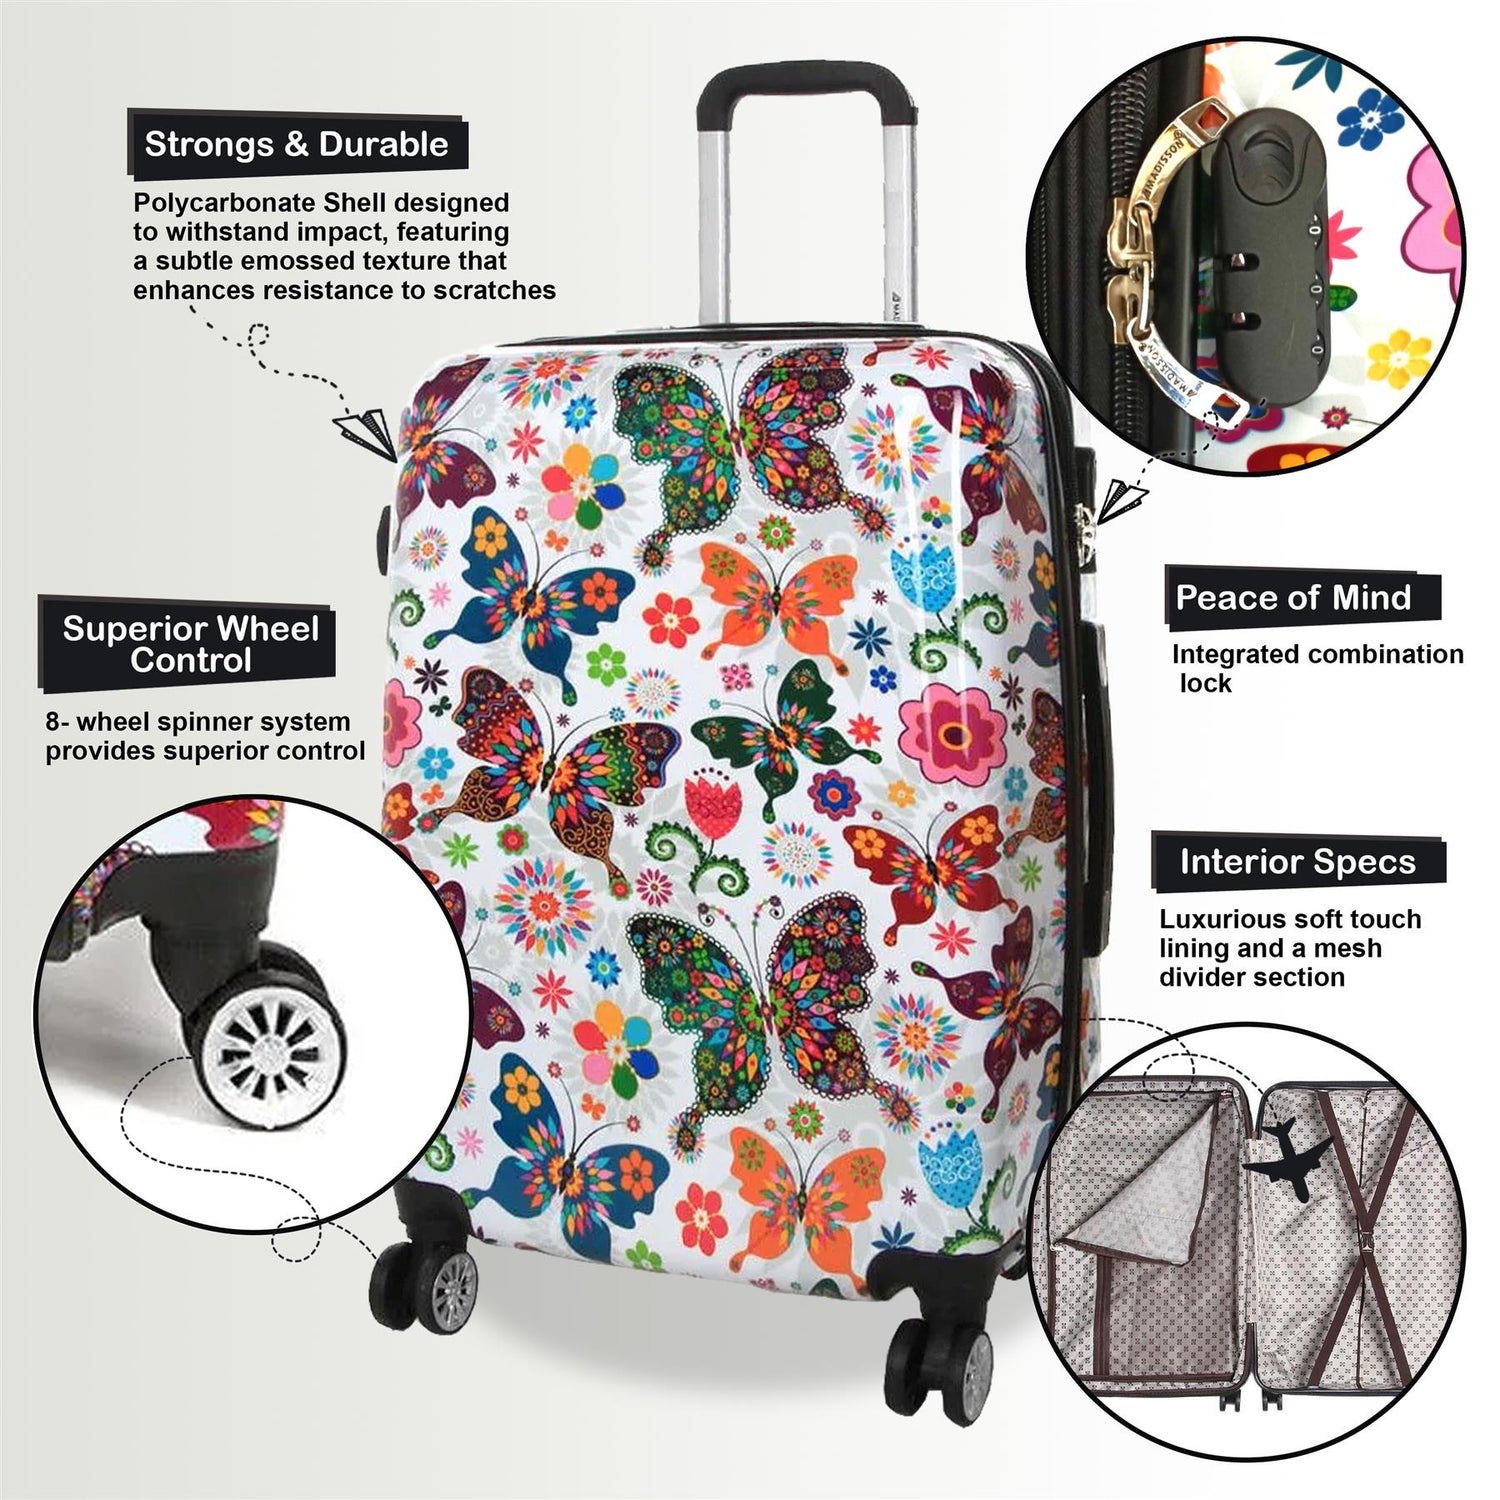 Clanton Large Hard Shell Suitcase in Butterfly